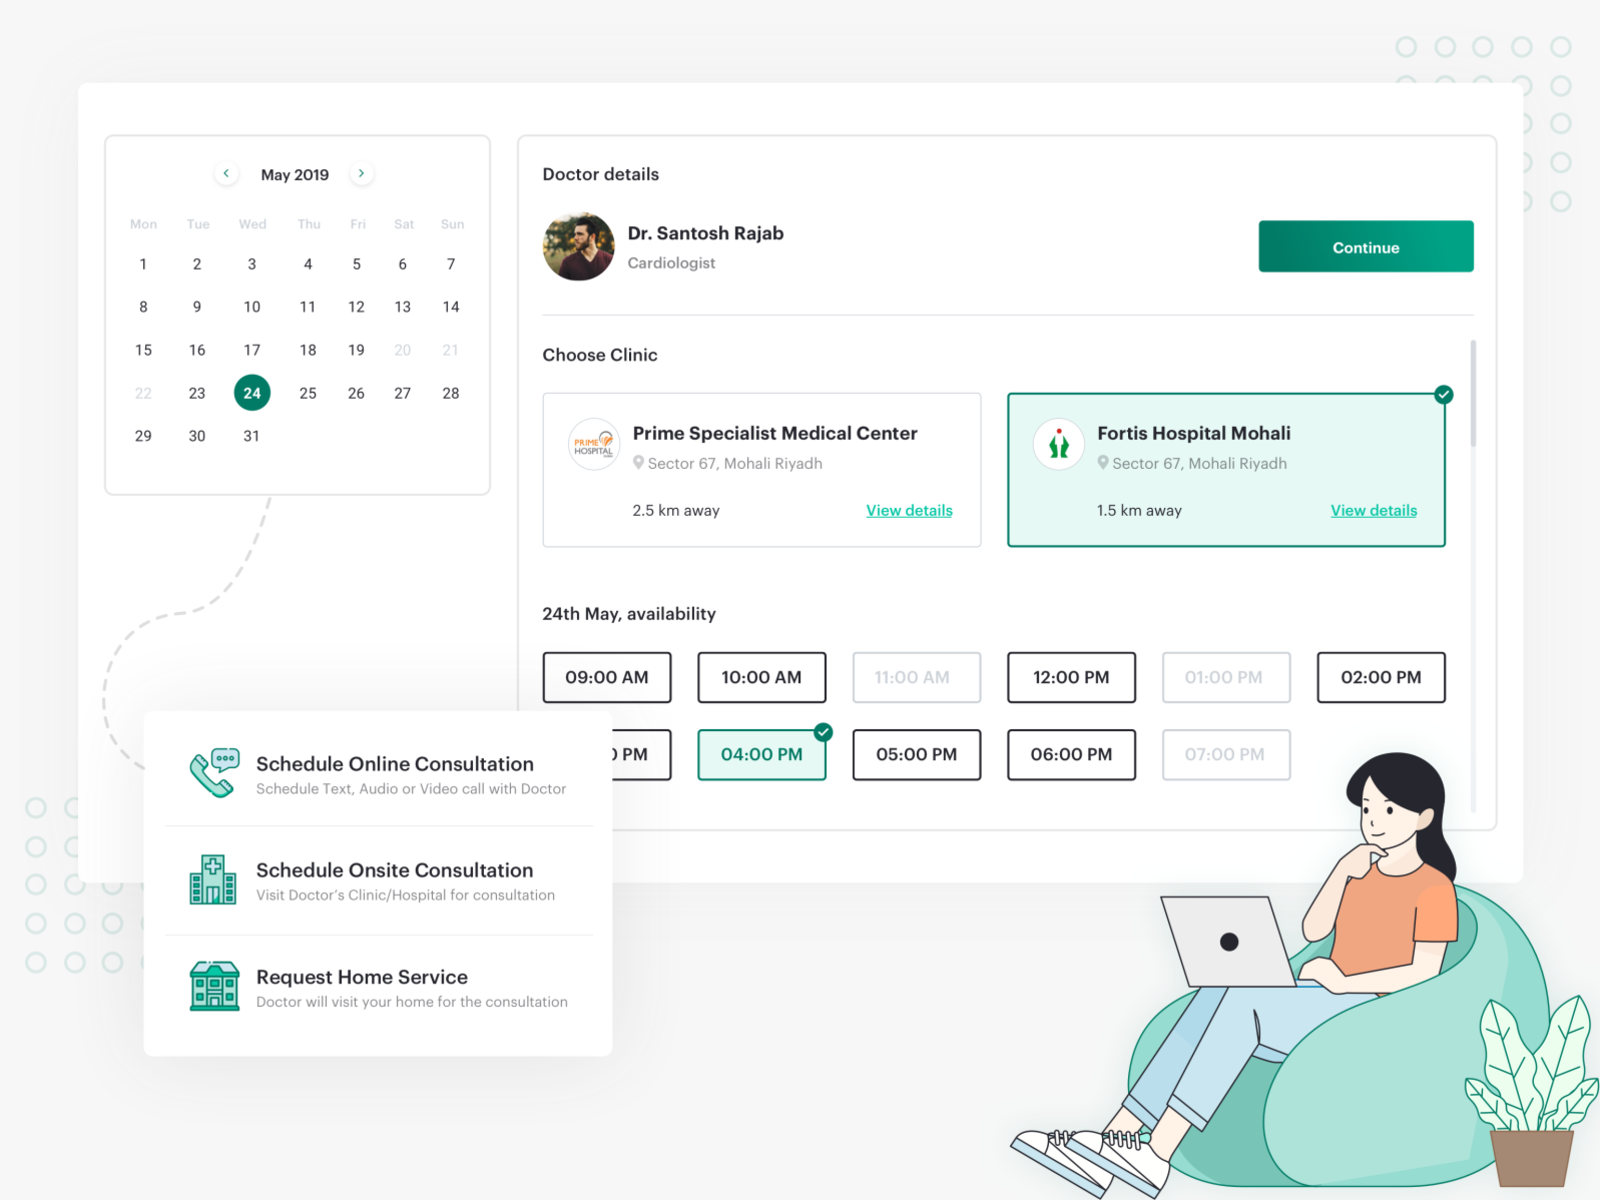 book-doctor-appointment-online-by-avinash-koundal-on-dribbble